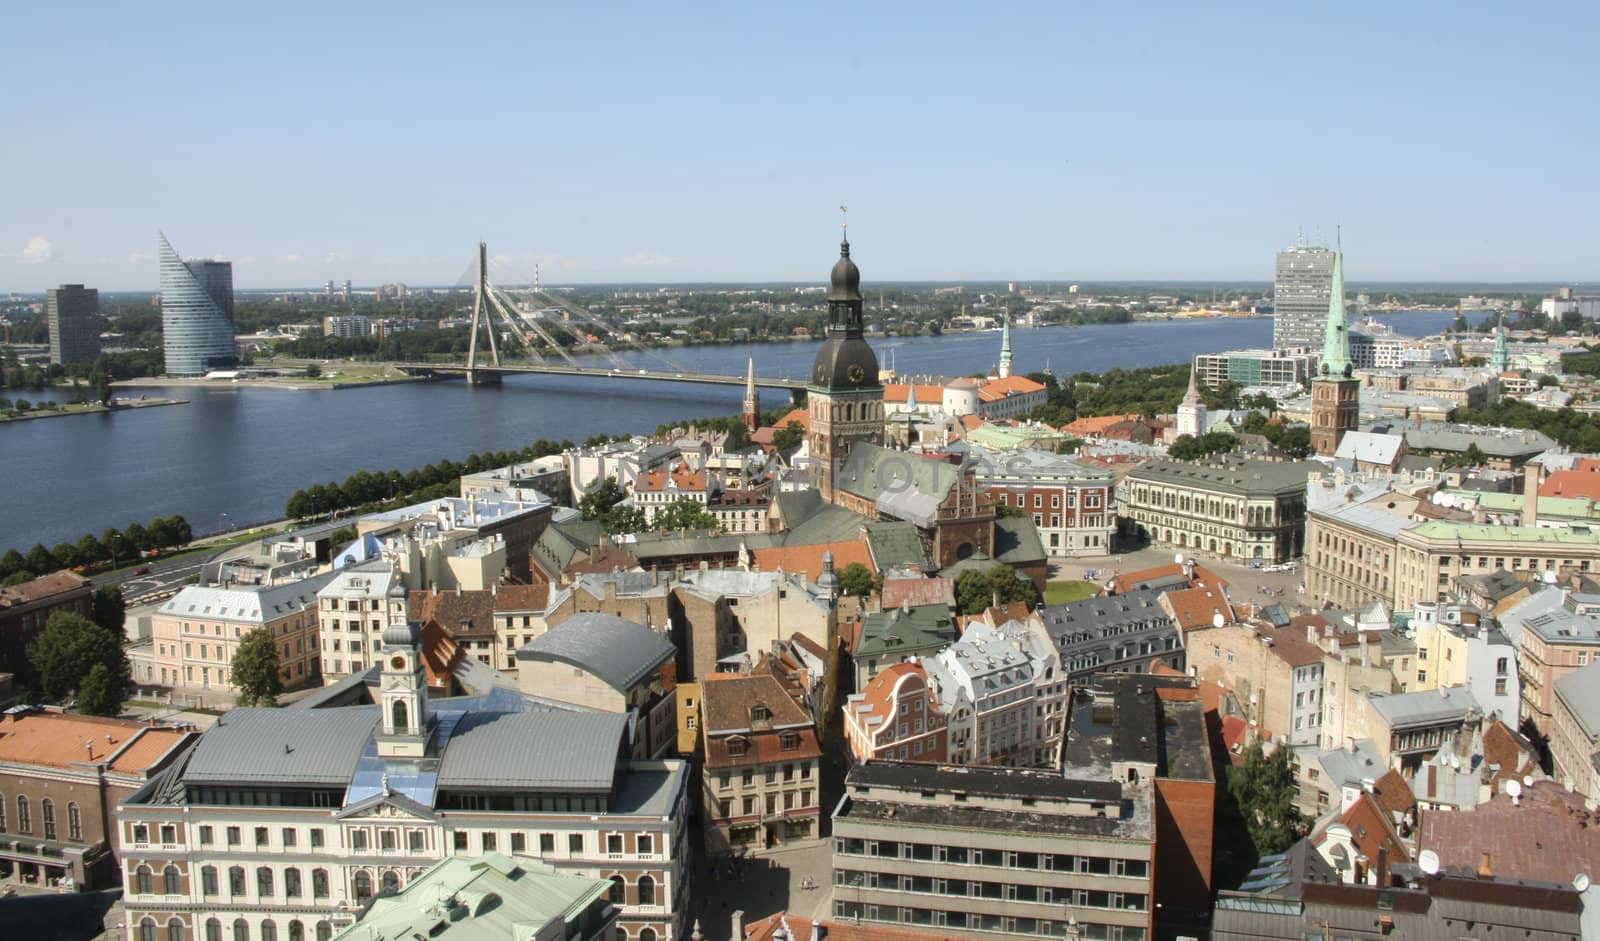 Riga old town, view from Saint Peter church tower